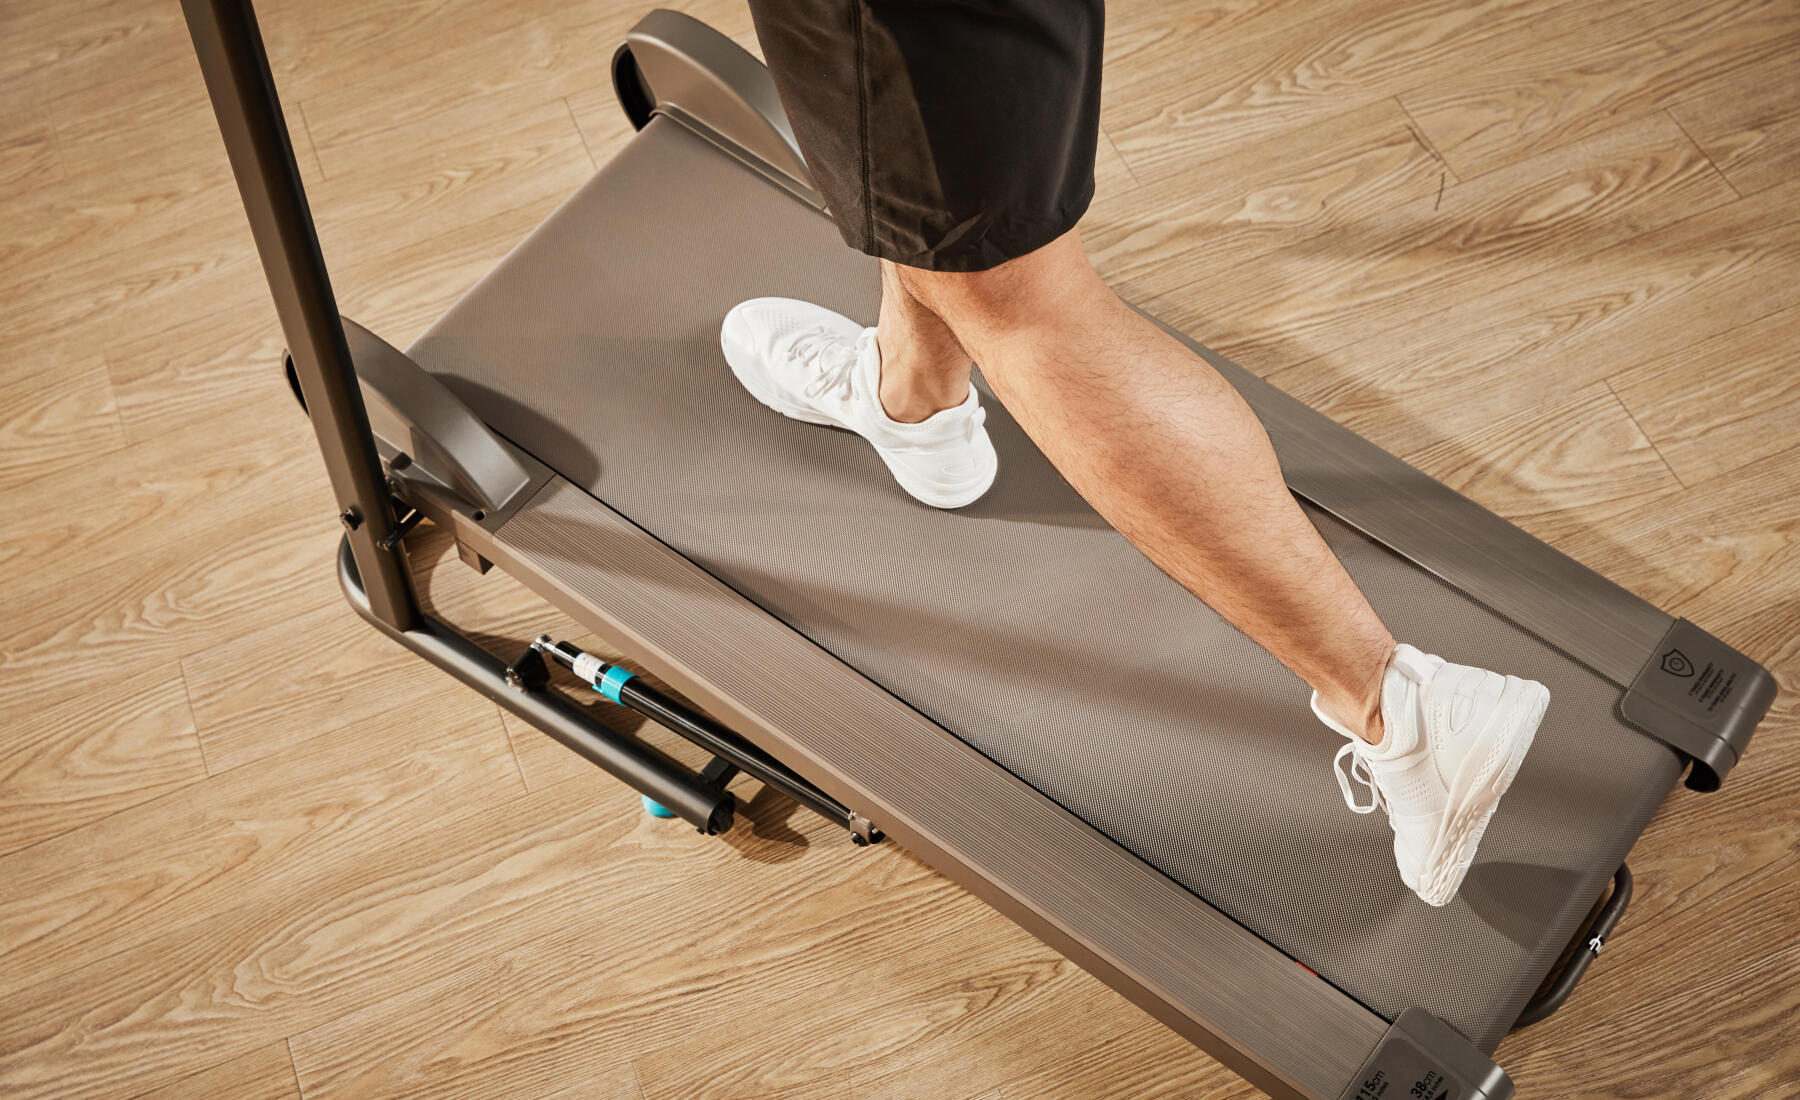 How To Choose Your Treadmill?